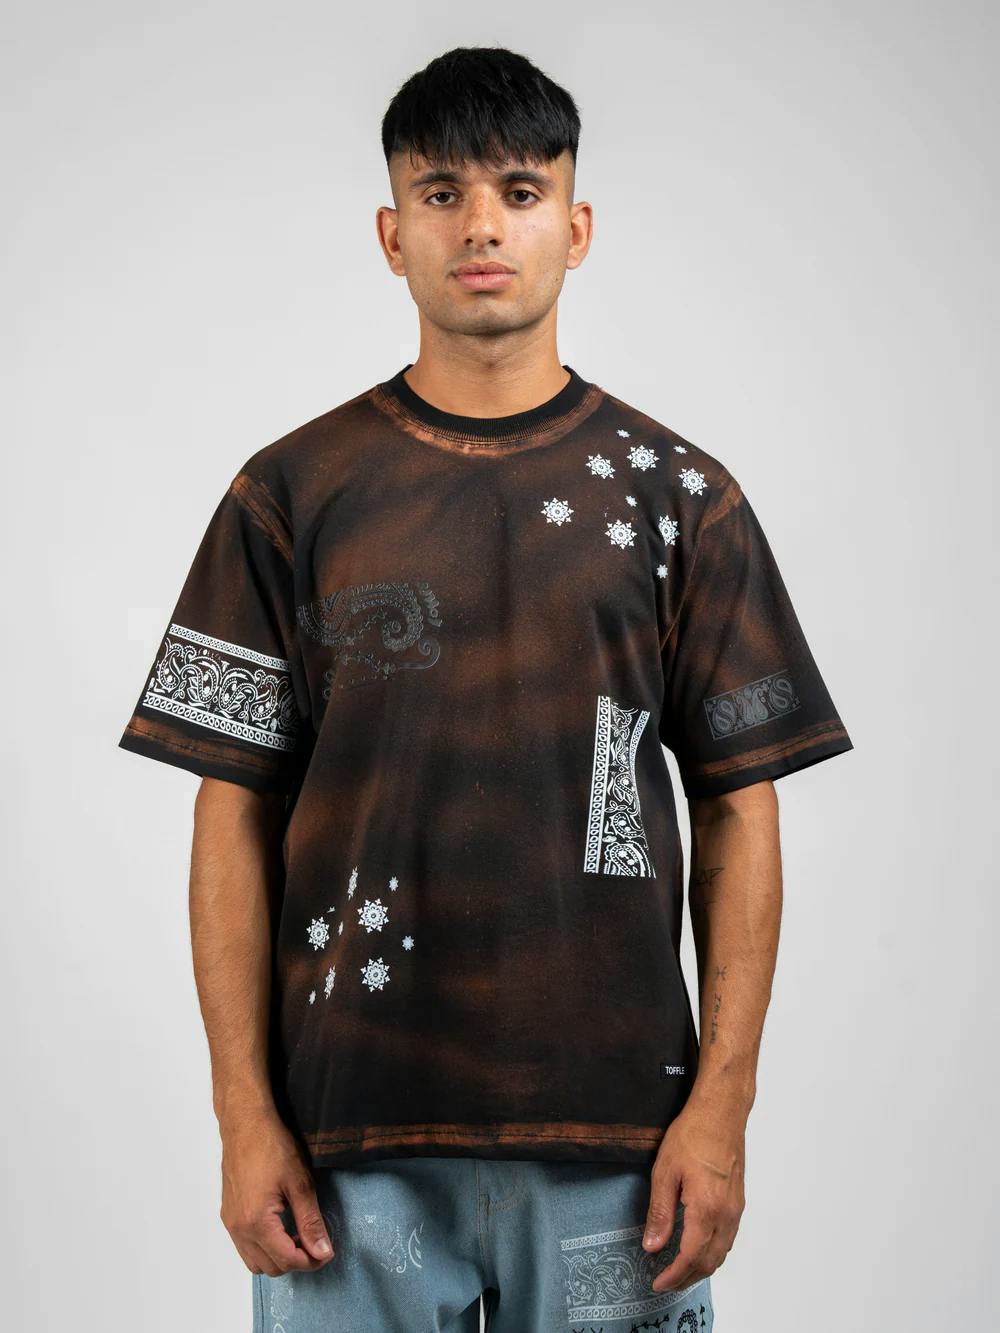 Black Bleached Paisley T-shirt, a product by TOFFLE